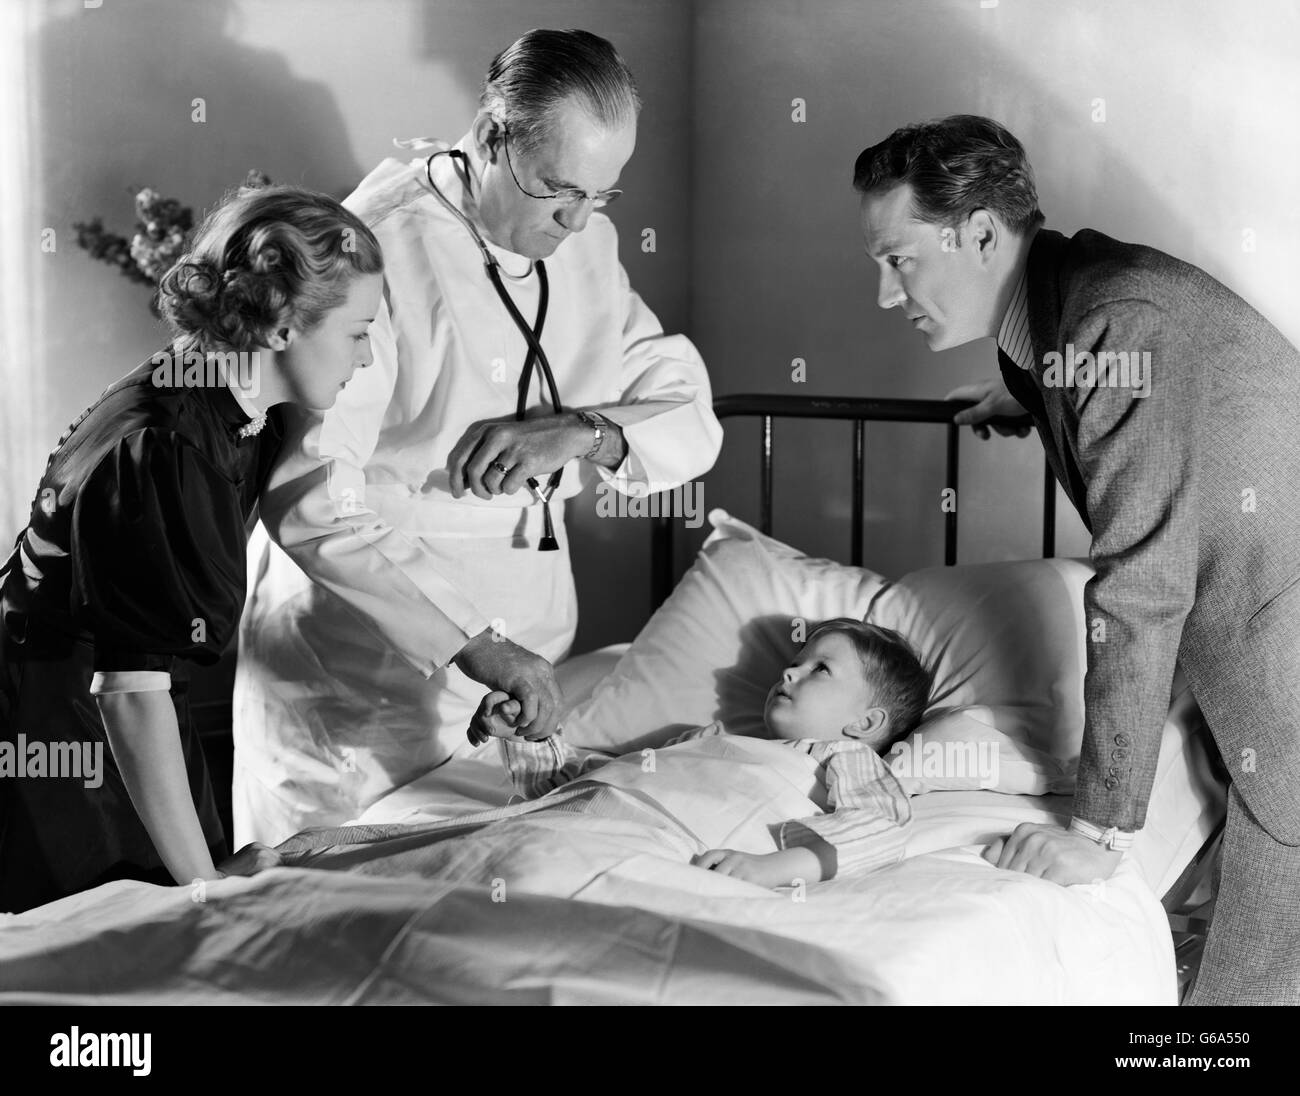 1930s CONCERNED MOTHER FATHER WITH DOCTOR CHECKING PULSE SMALL BOY IN HOSPITAL BED Stock Photo